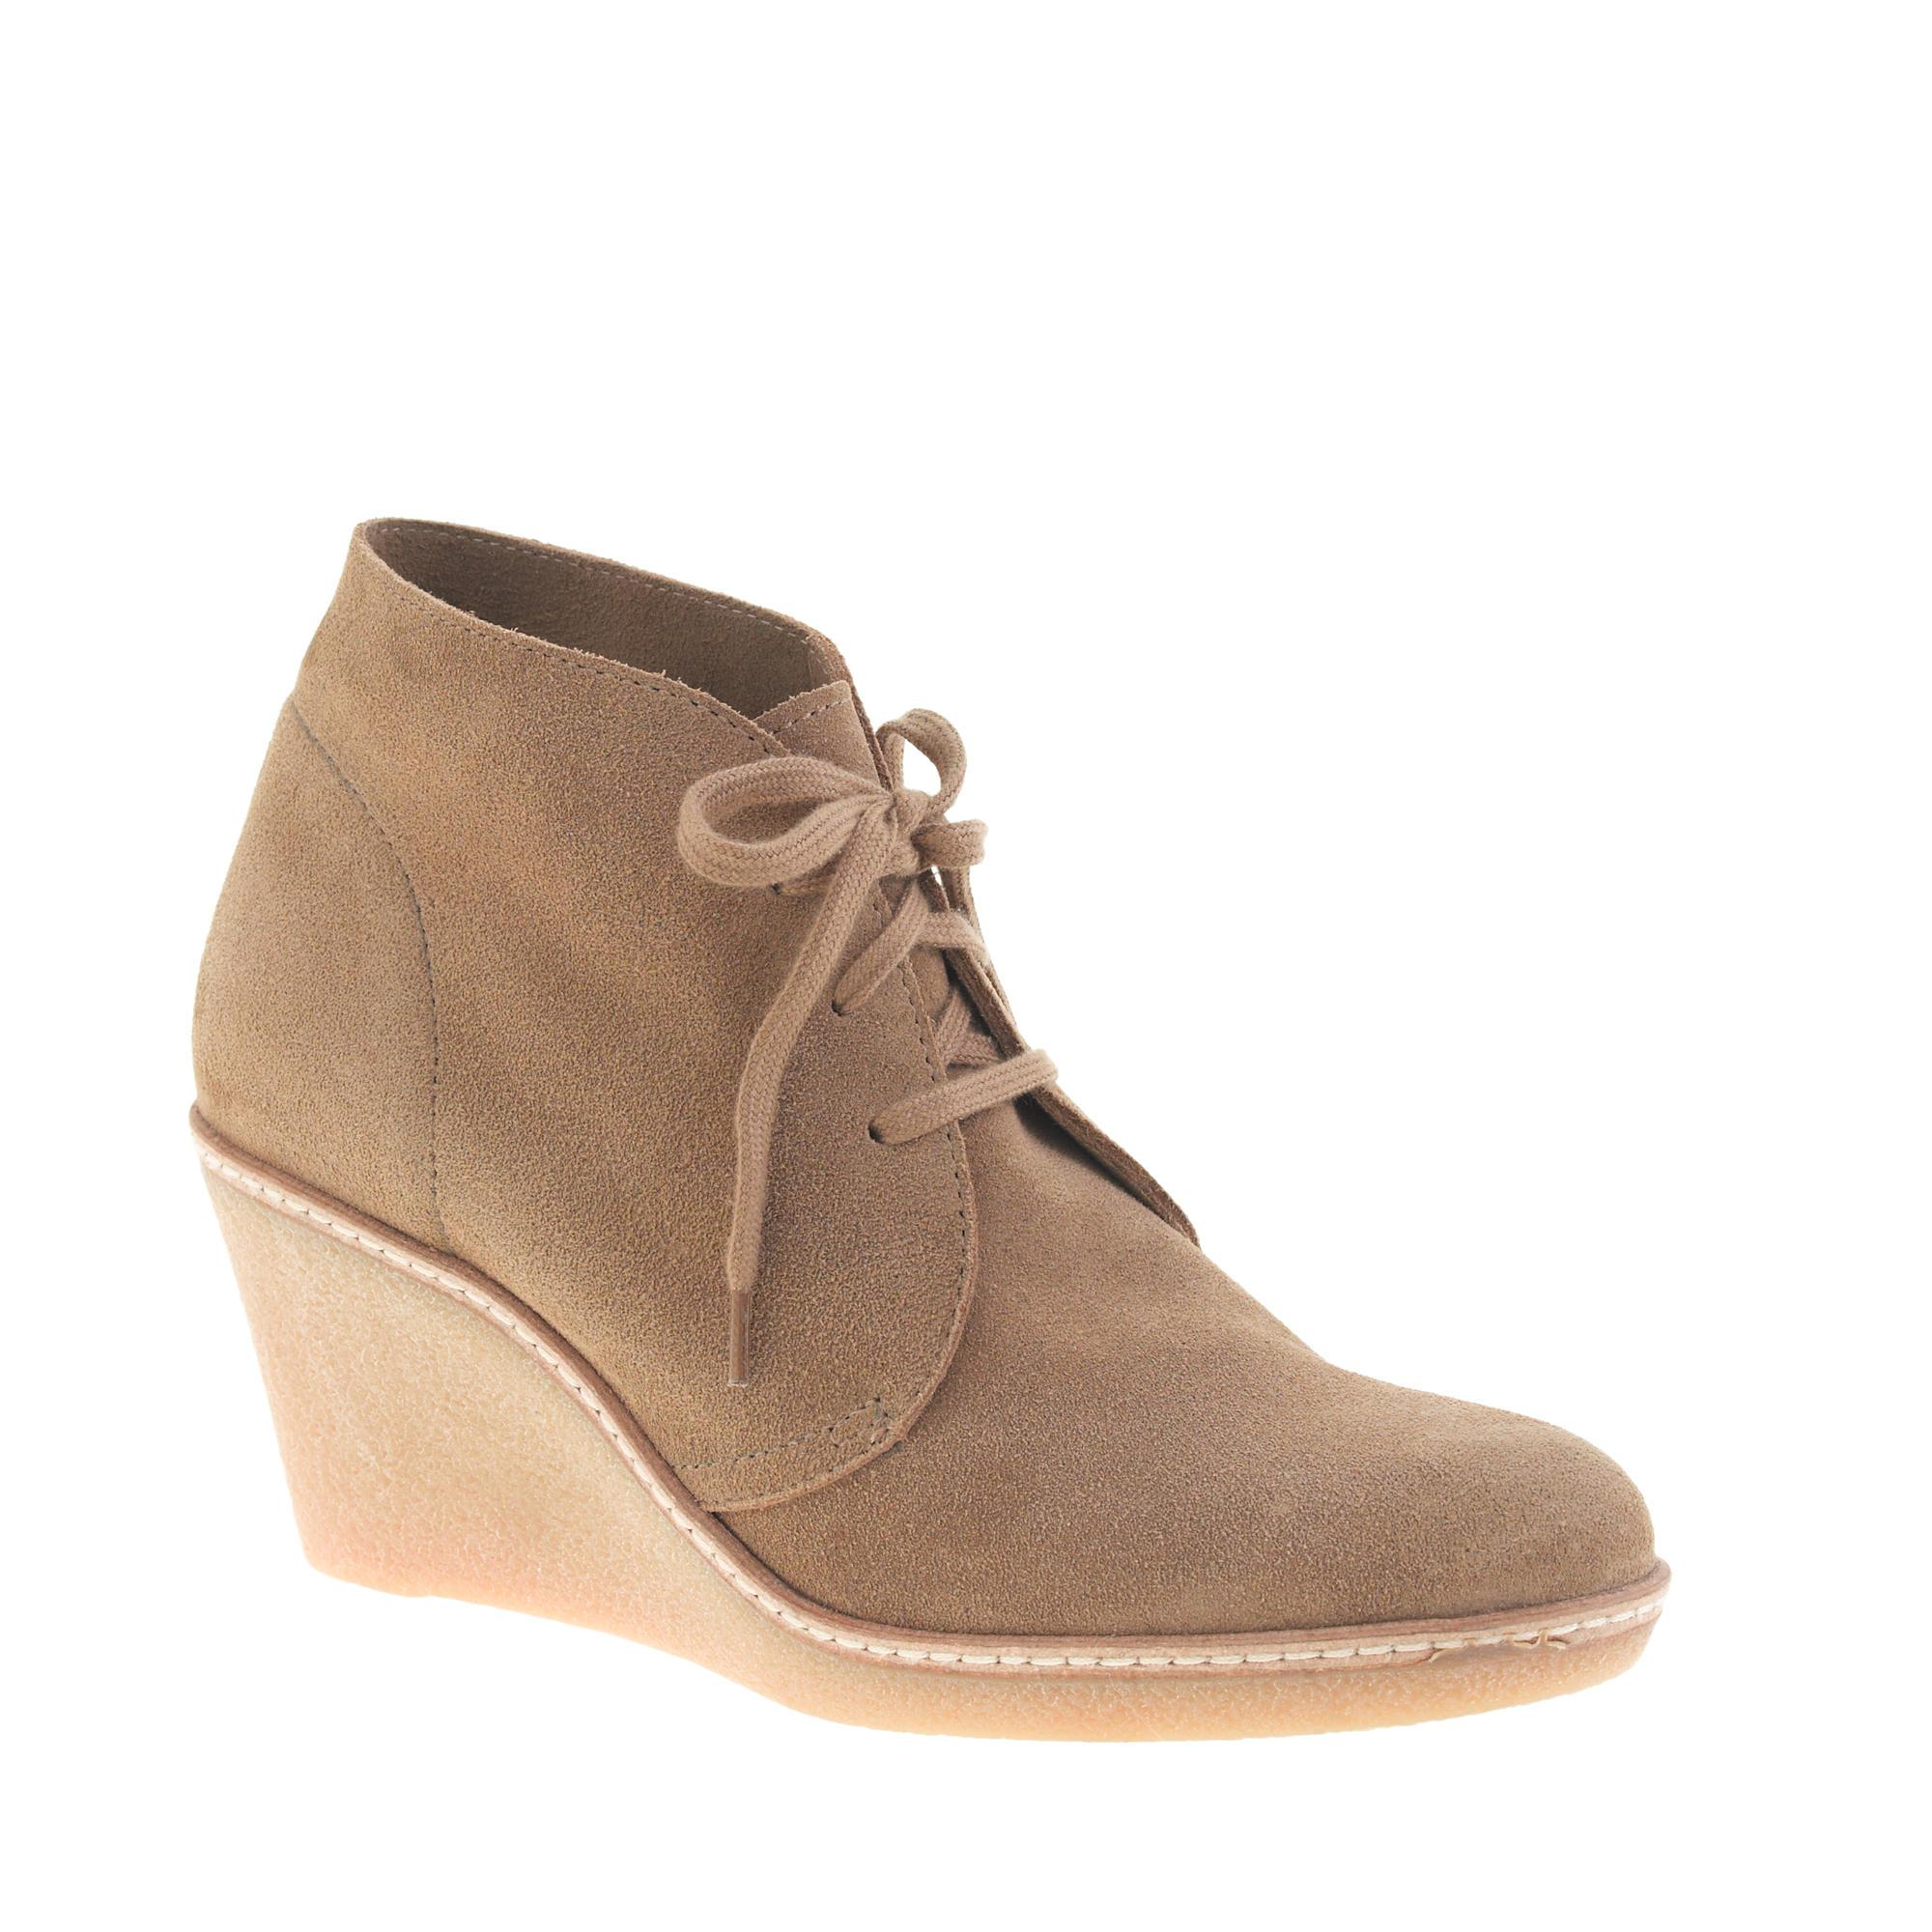 J.Crew Macalister Wedge Boots in Brown - Lyst